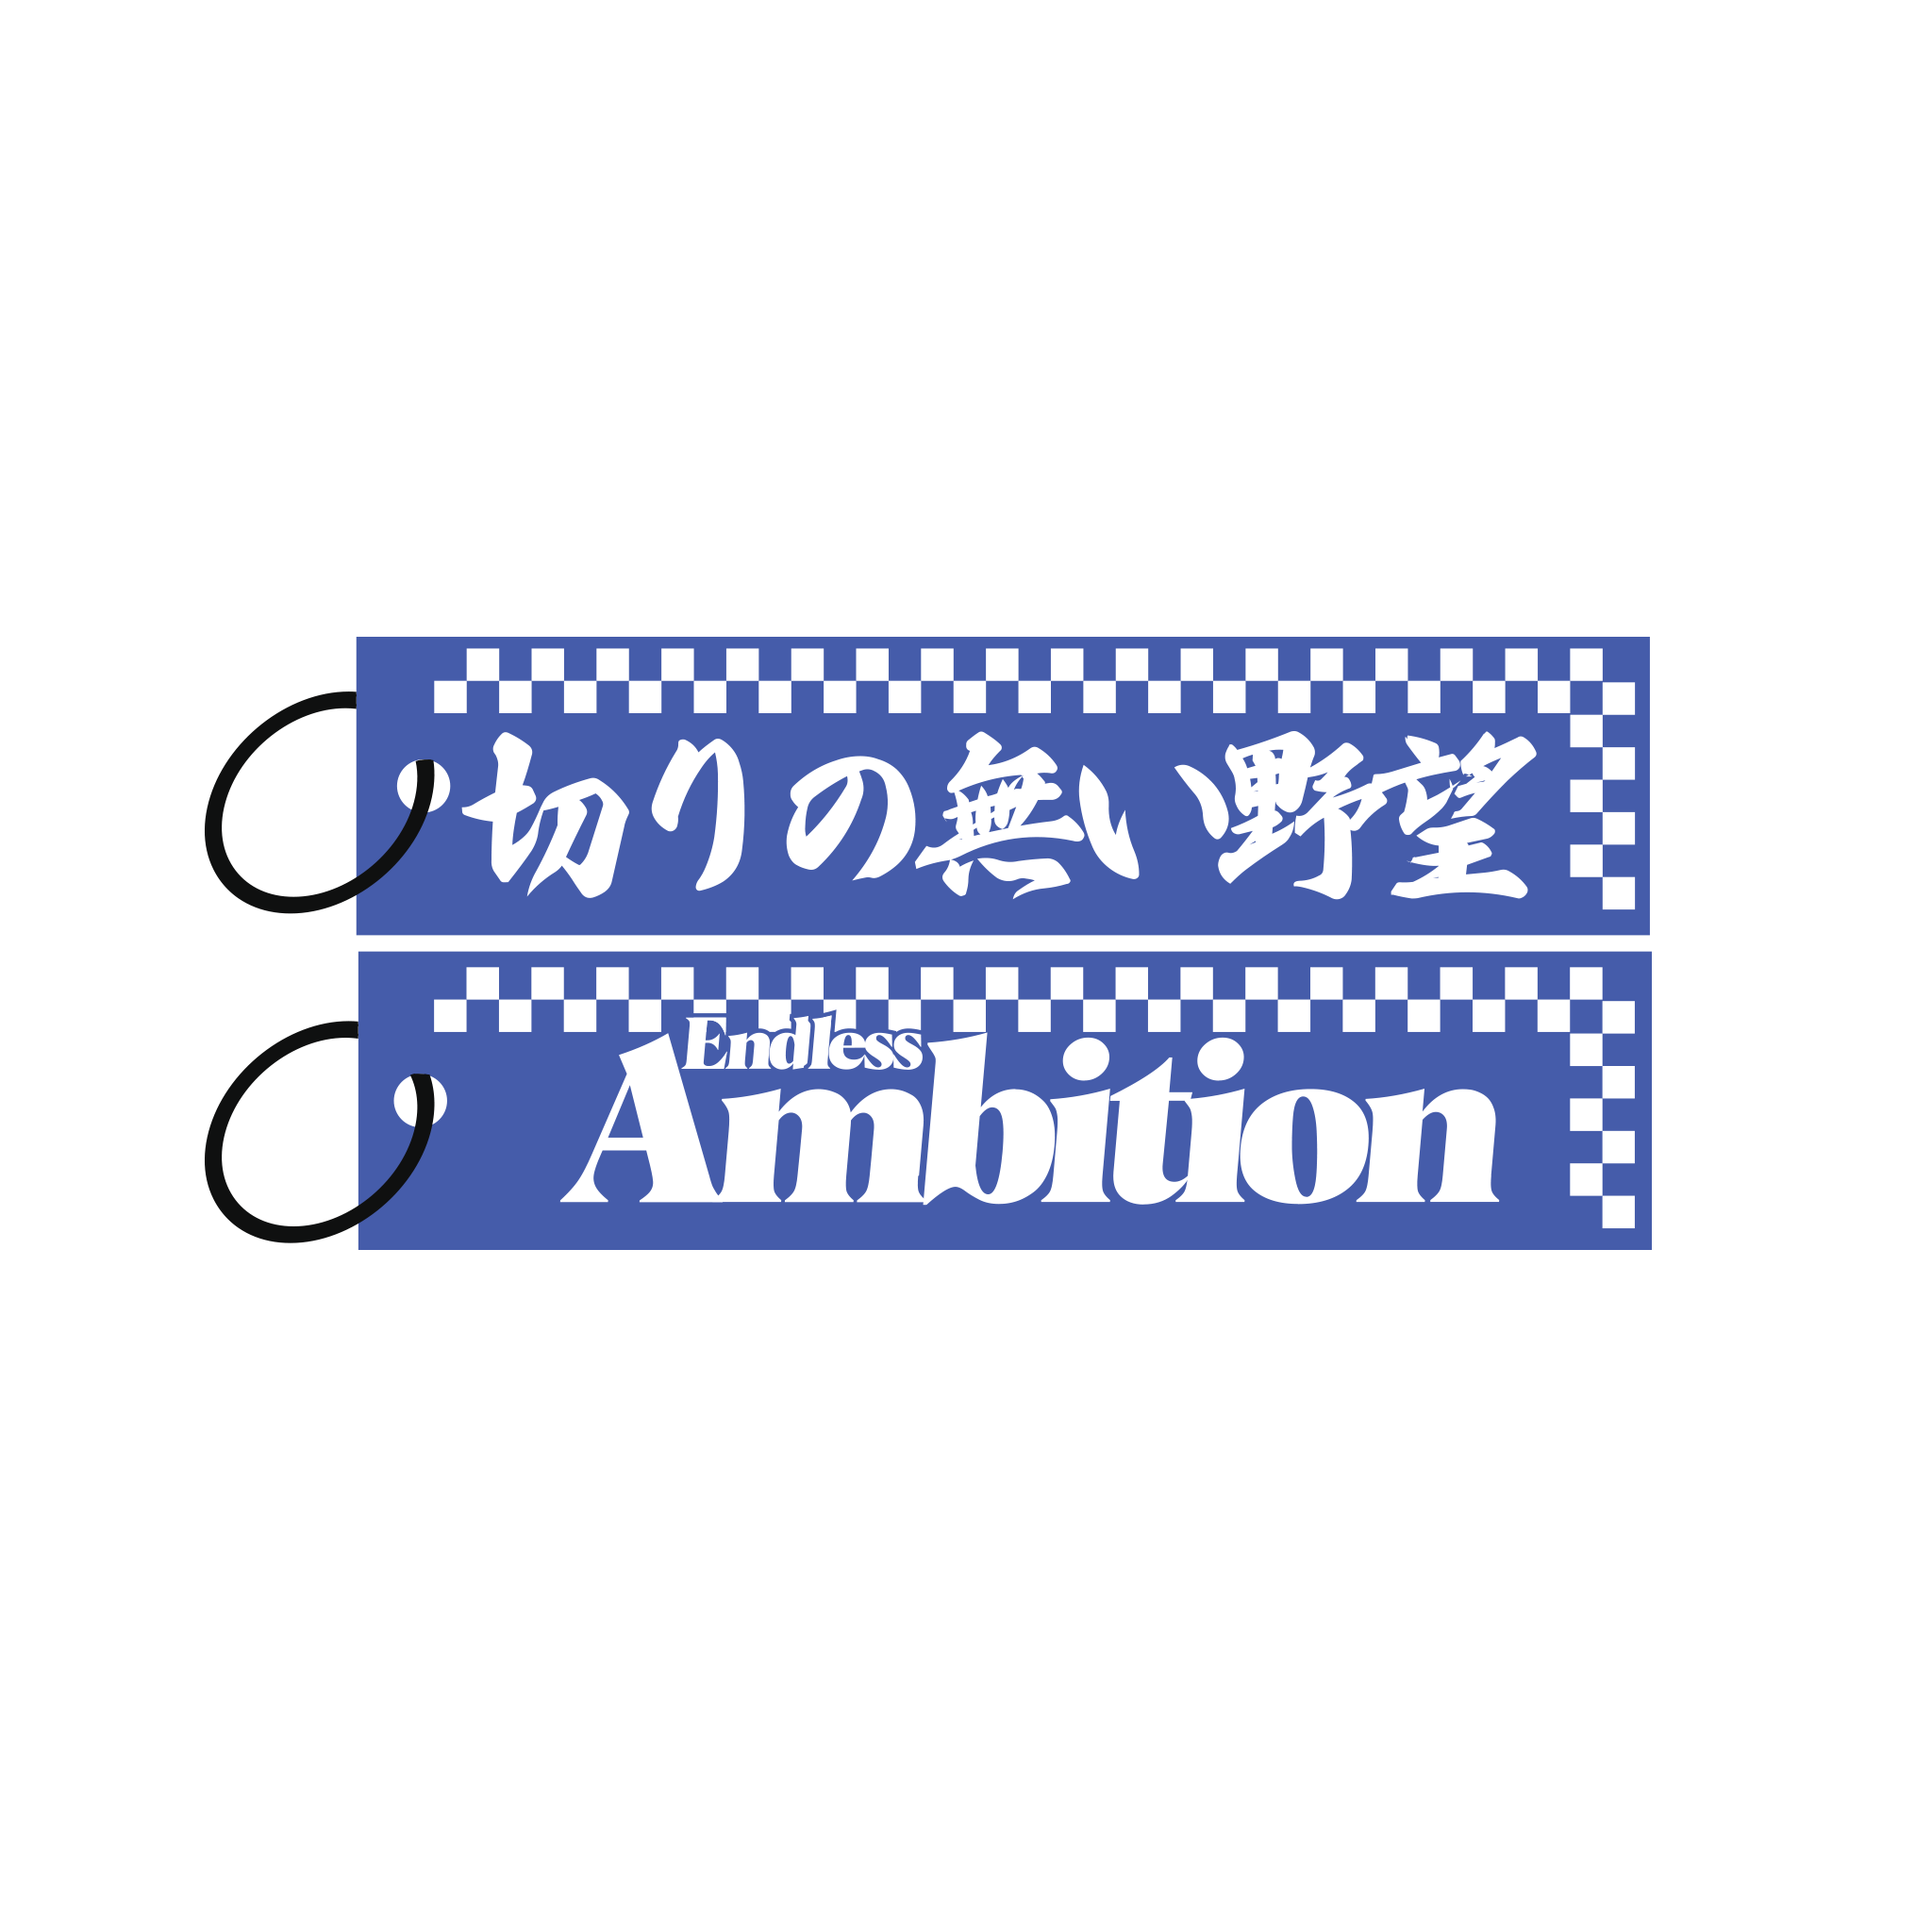 Endless Ambition Jet Tag